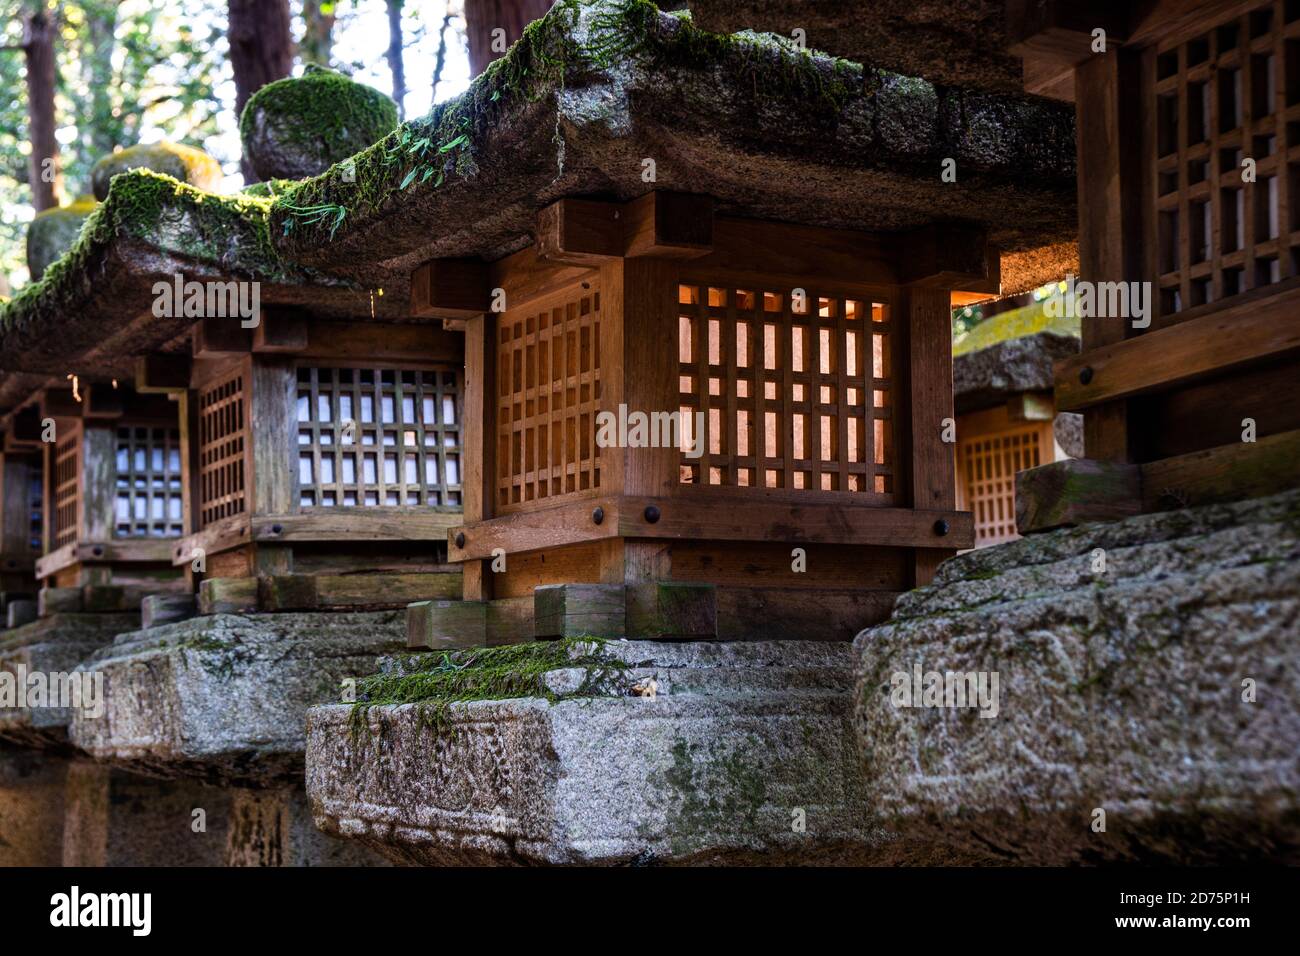 Stone and wood lantern at shinto shrine in Japan. Stock Photo